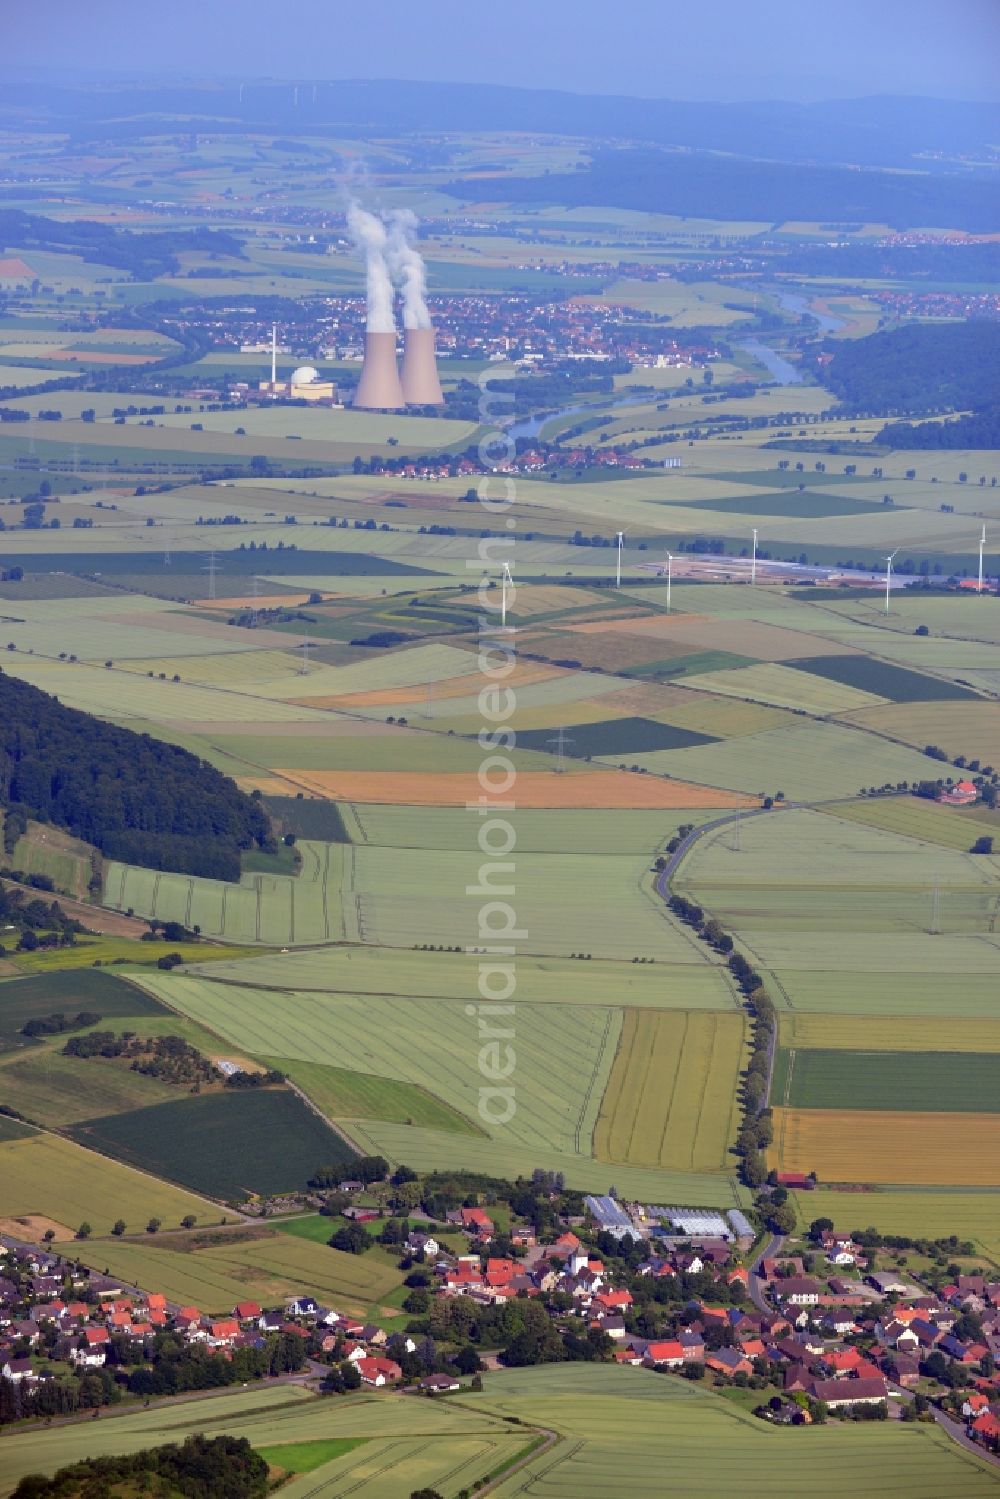 Aerial image Heyen / Grohnde - Landscape view of the Weser Valley. In the foreground is the town of Heyen, in the background is the Nuclear power plant Grohnde in the state of Lower Saxony. The plant has a pressurized water reactor and is located at the river Weser in the county district of Hameln - Pyrmont. The here produced power is fed into the high-voltage network